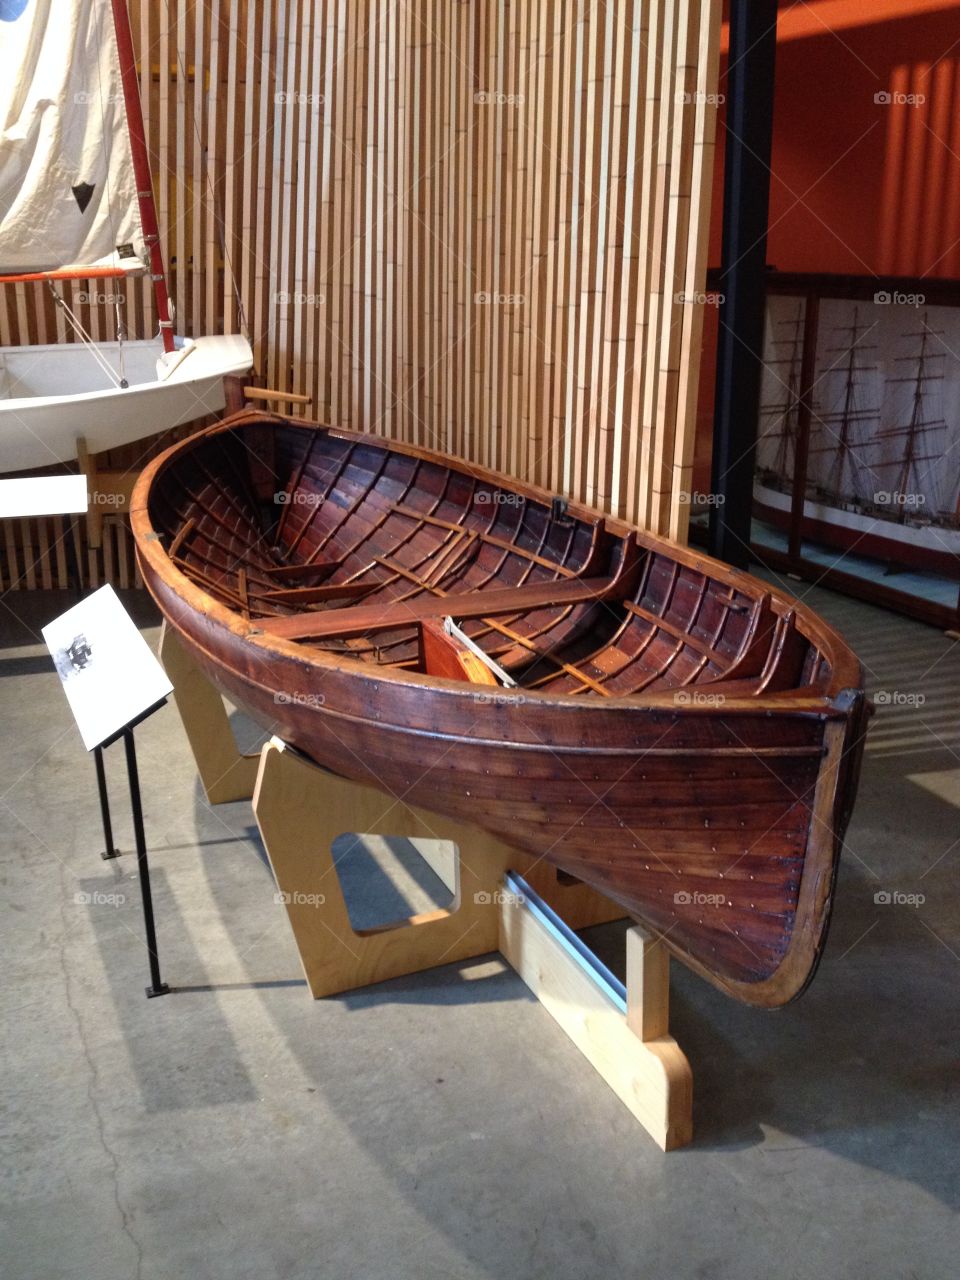 Magnificent old wooden hand made dinghy tender boat